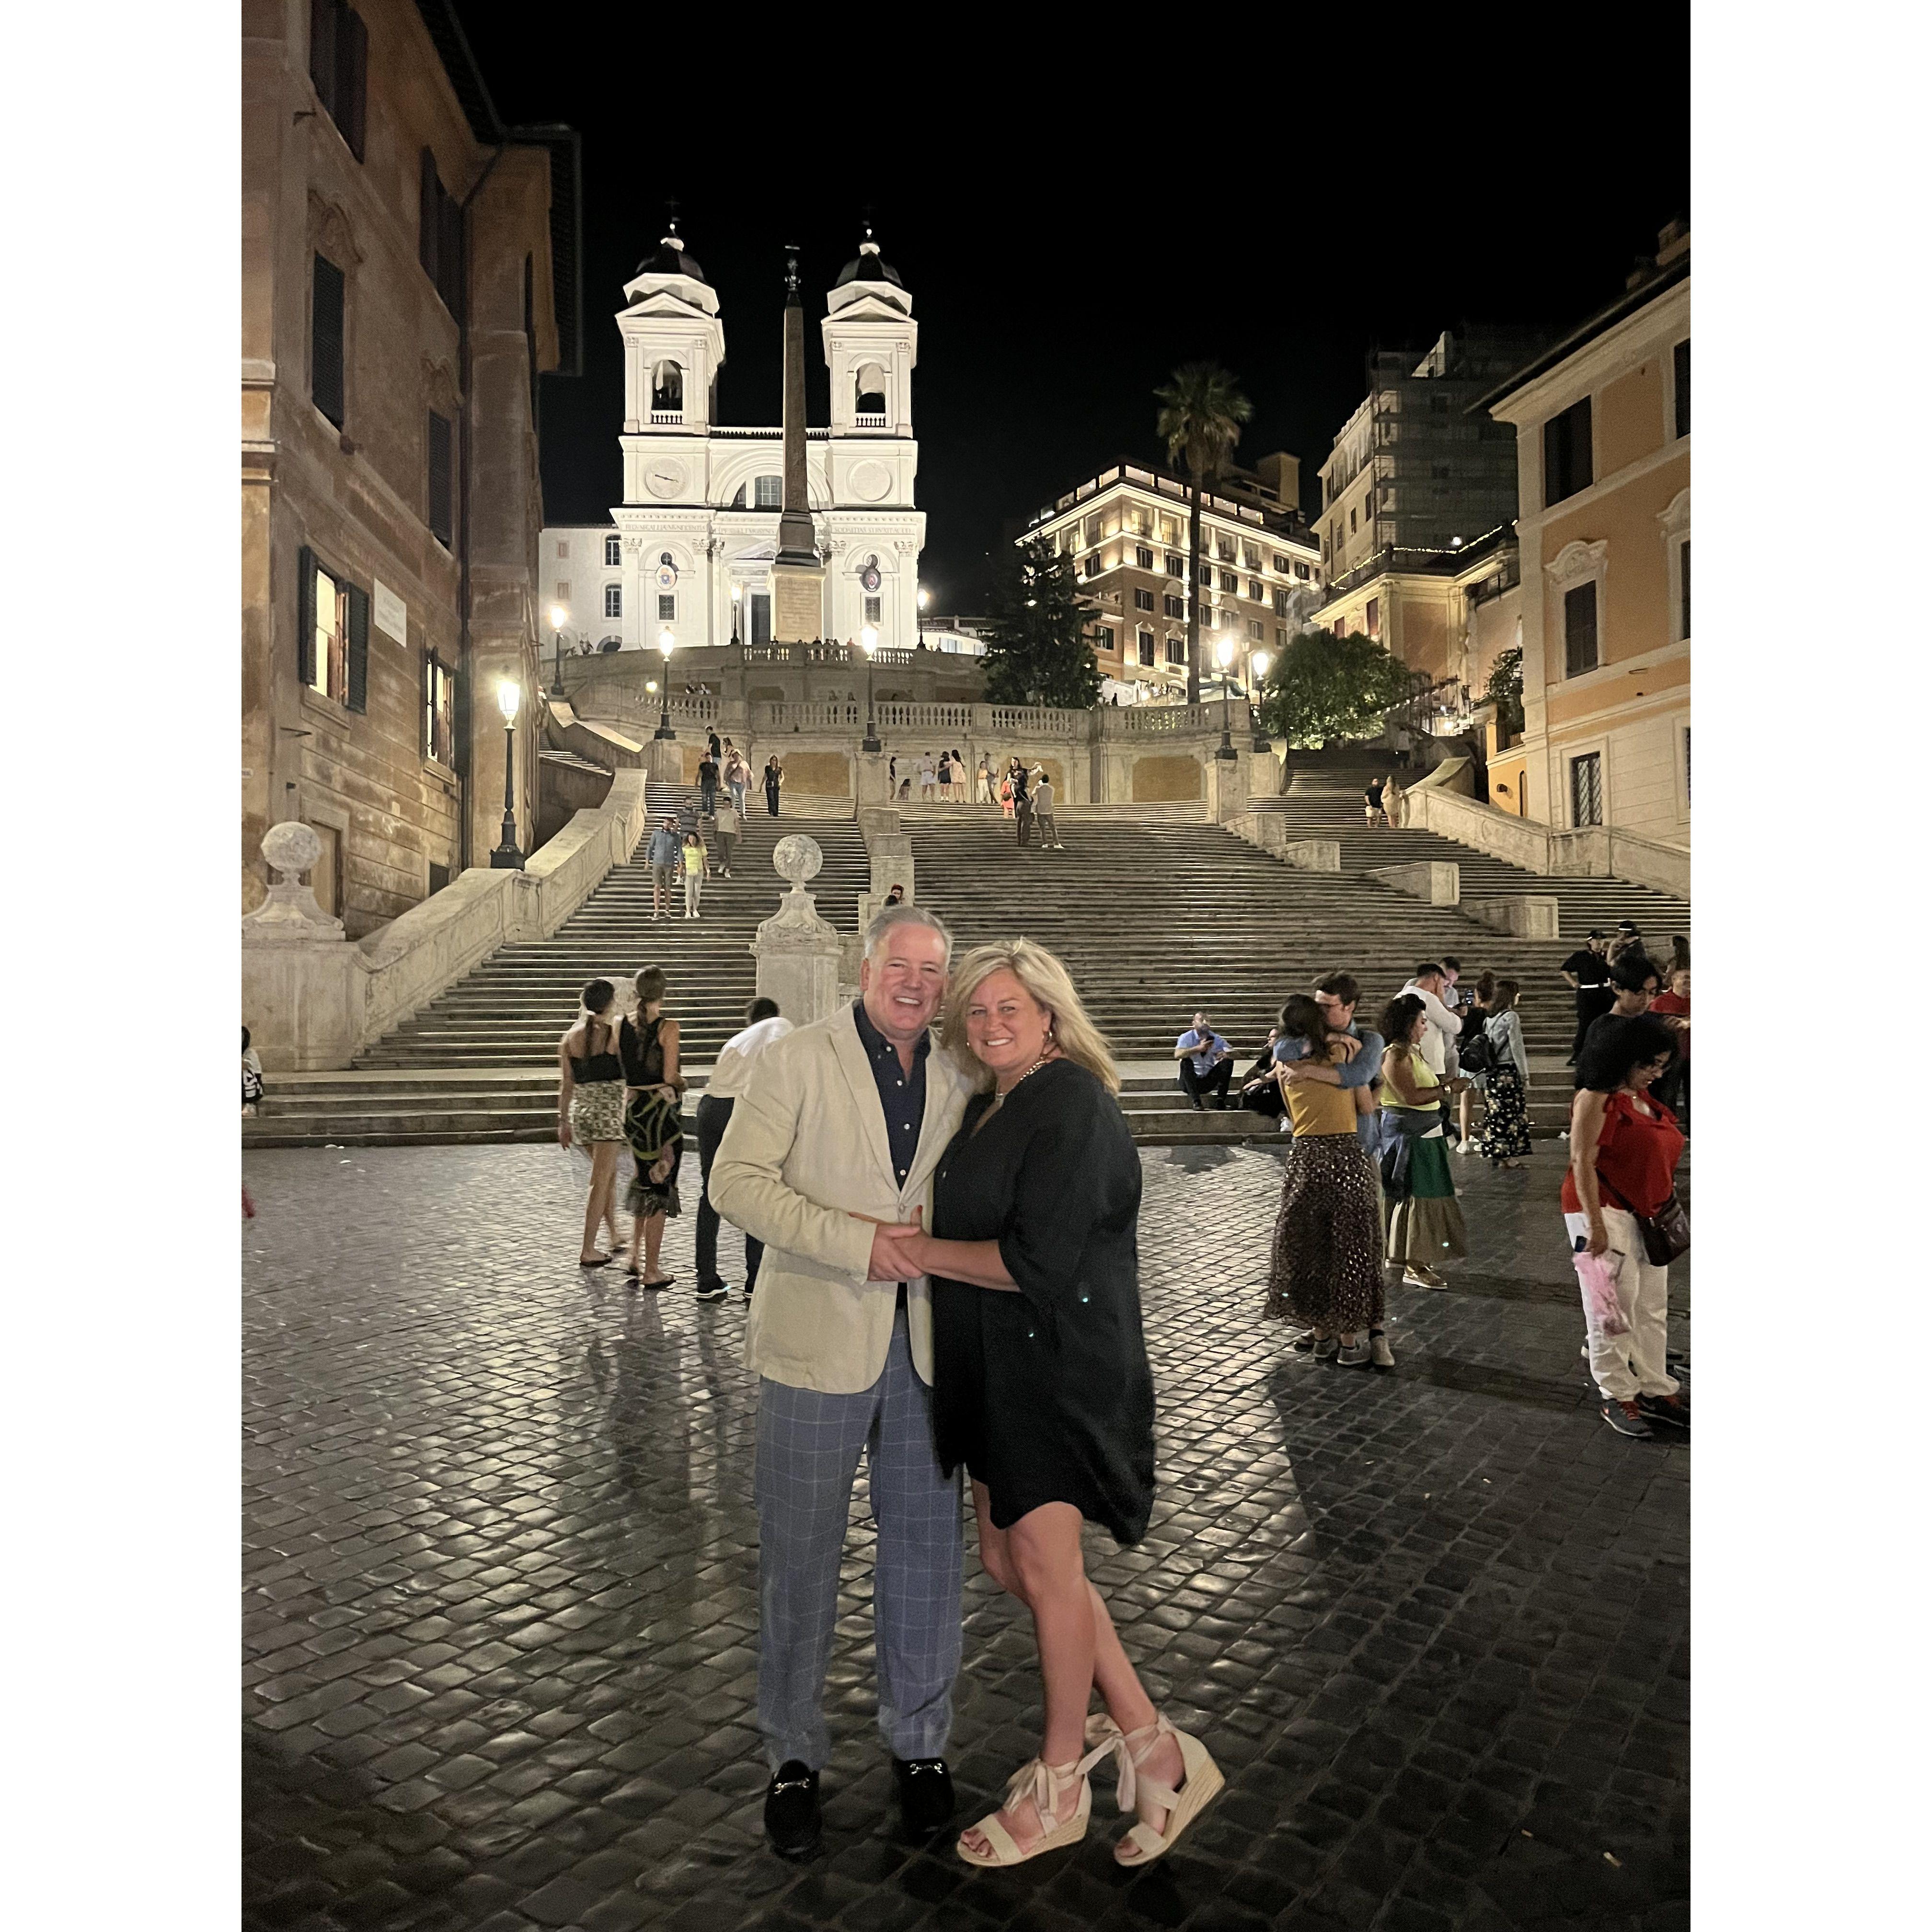 From our Rome trip in front of the Spanish Steps